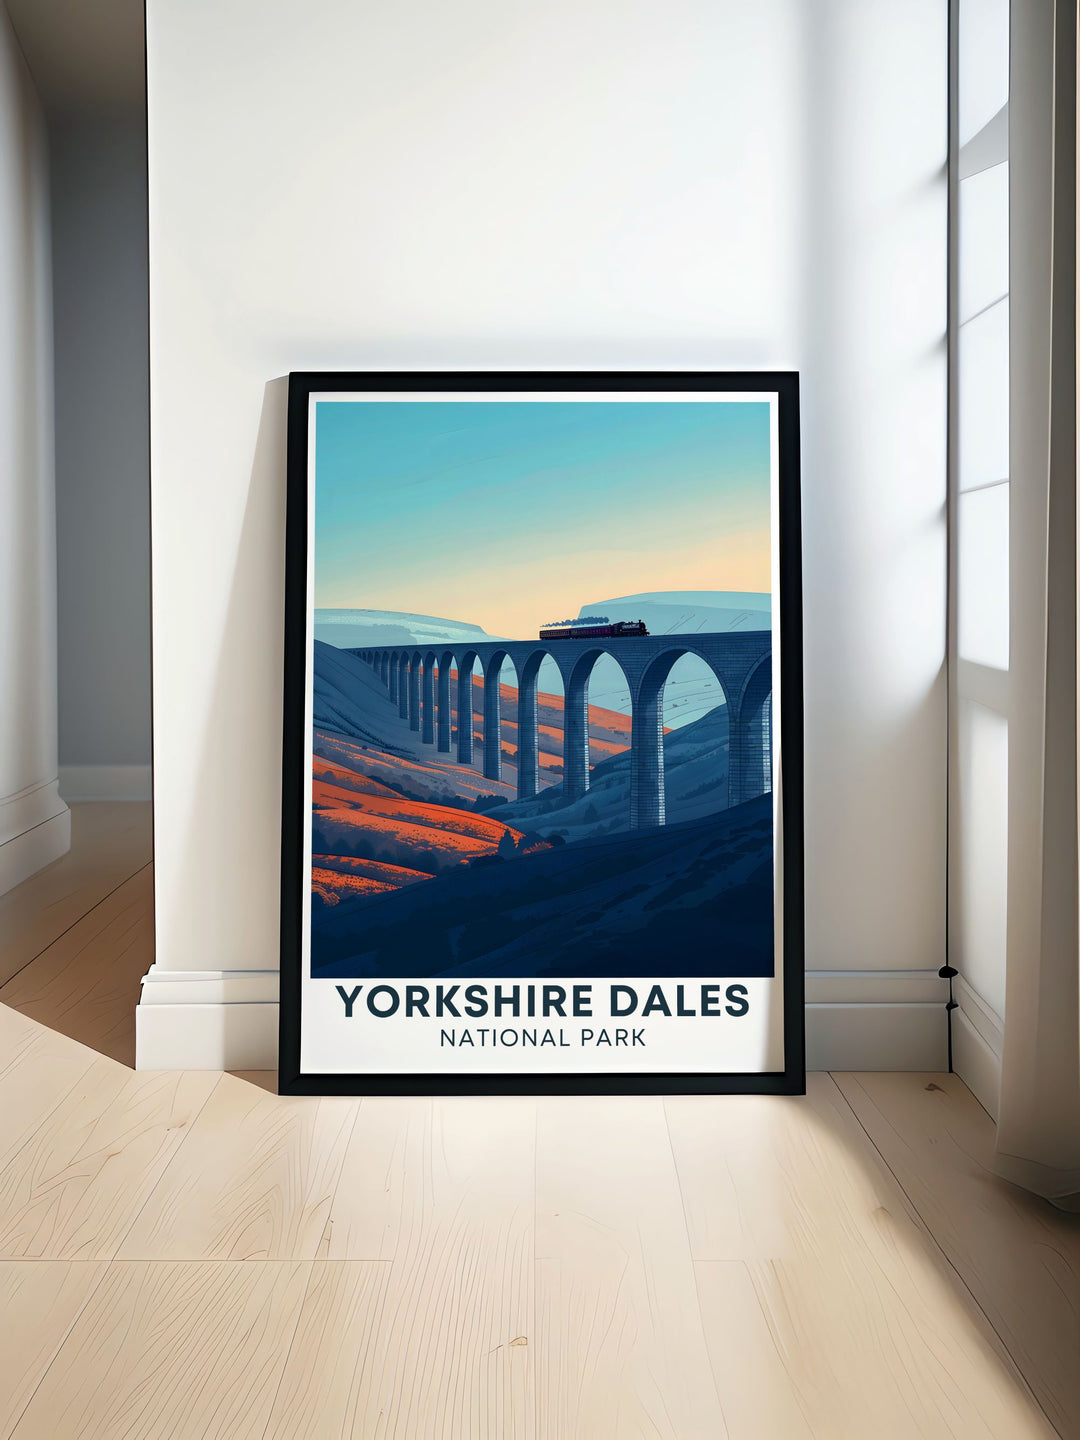 This Ribblehead Viaduct wall art captures the stunning architecture and scenic beauty of the Yorkshire Dales making it a perfect addition to your home decor and a beautiful reminder of this iconic landmark.